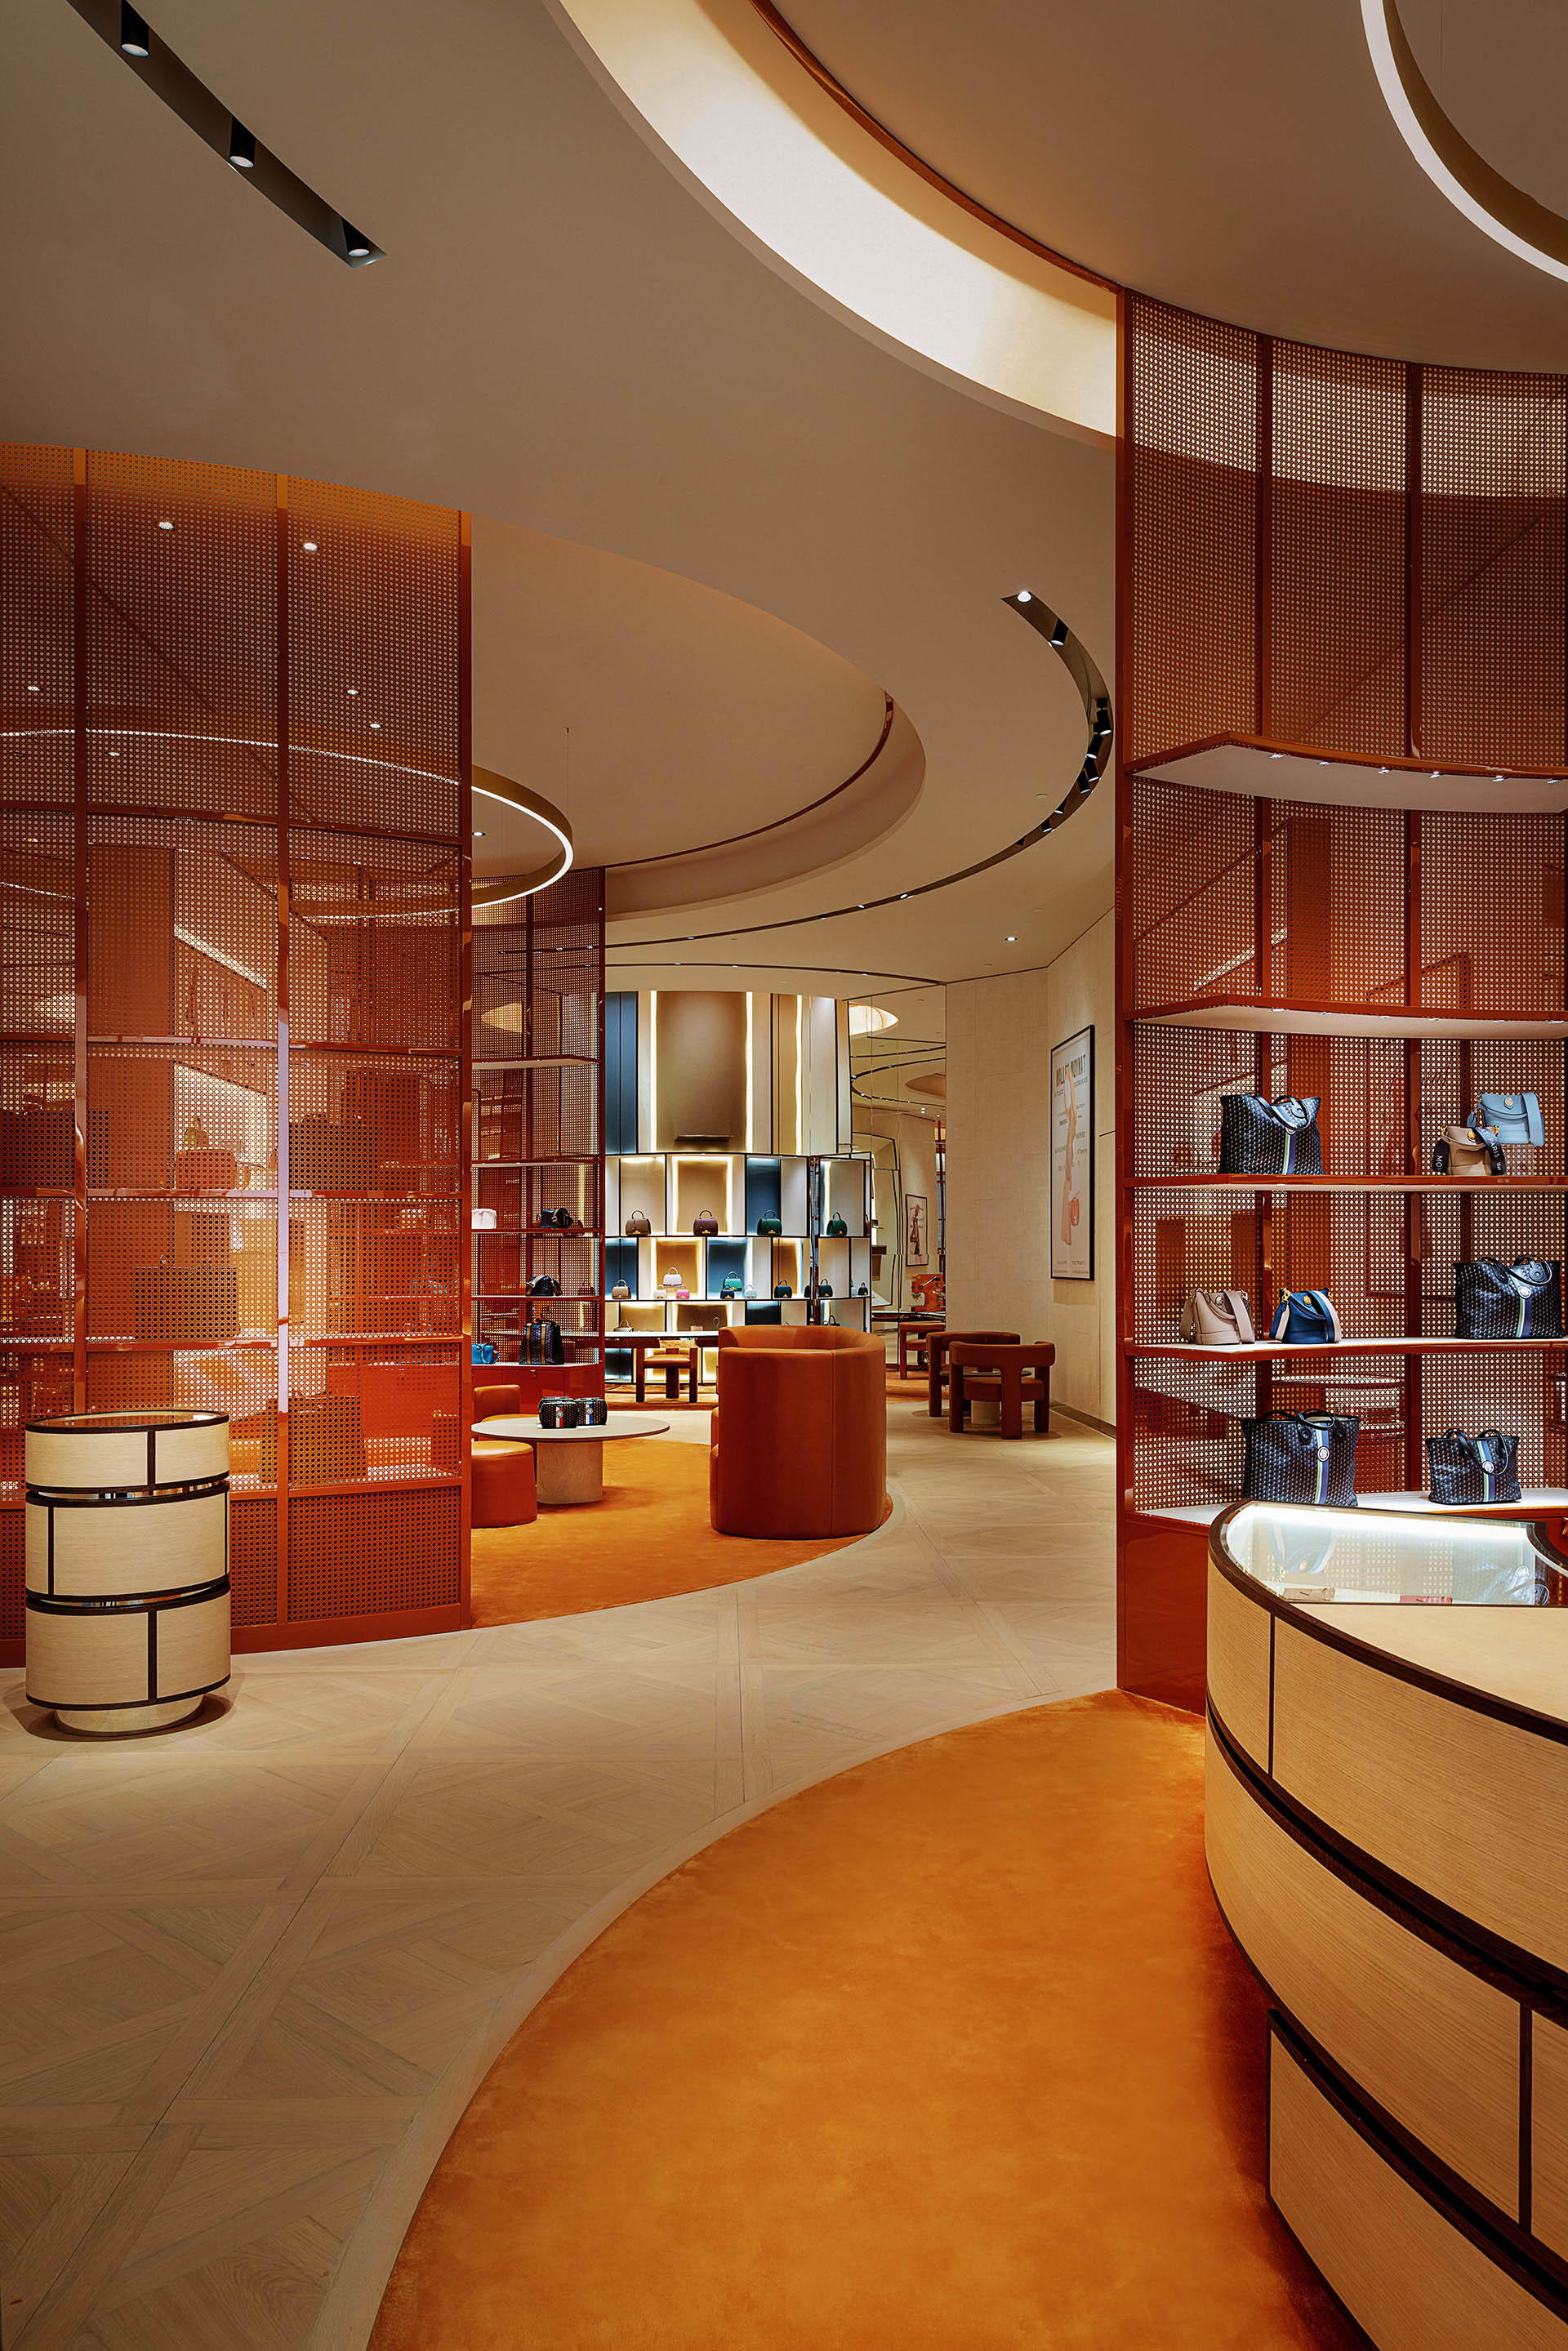 Louis Vuitton opens new store in Qatar